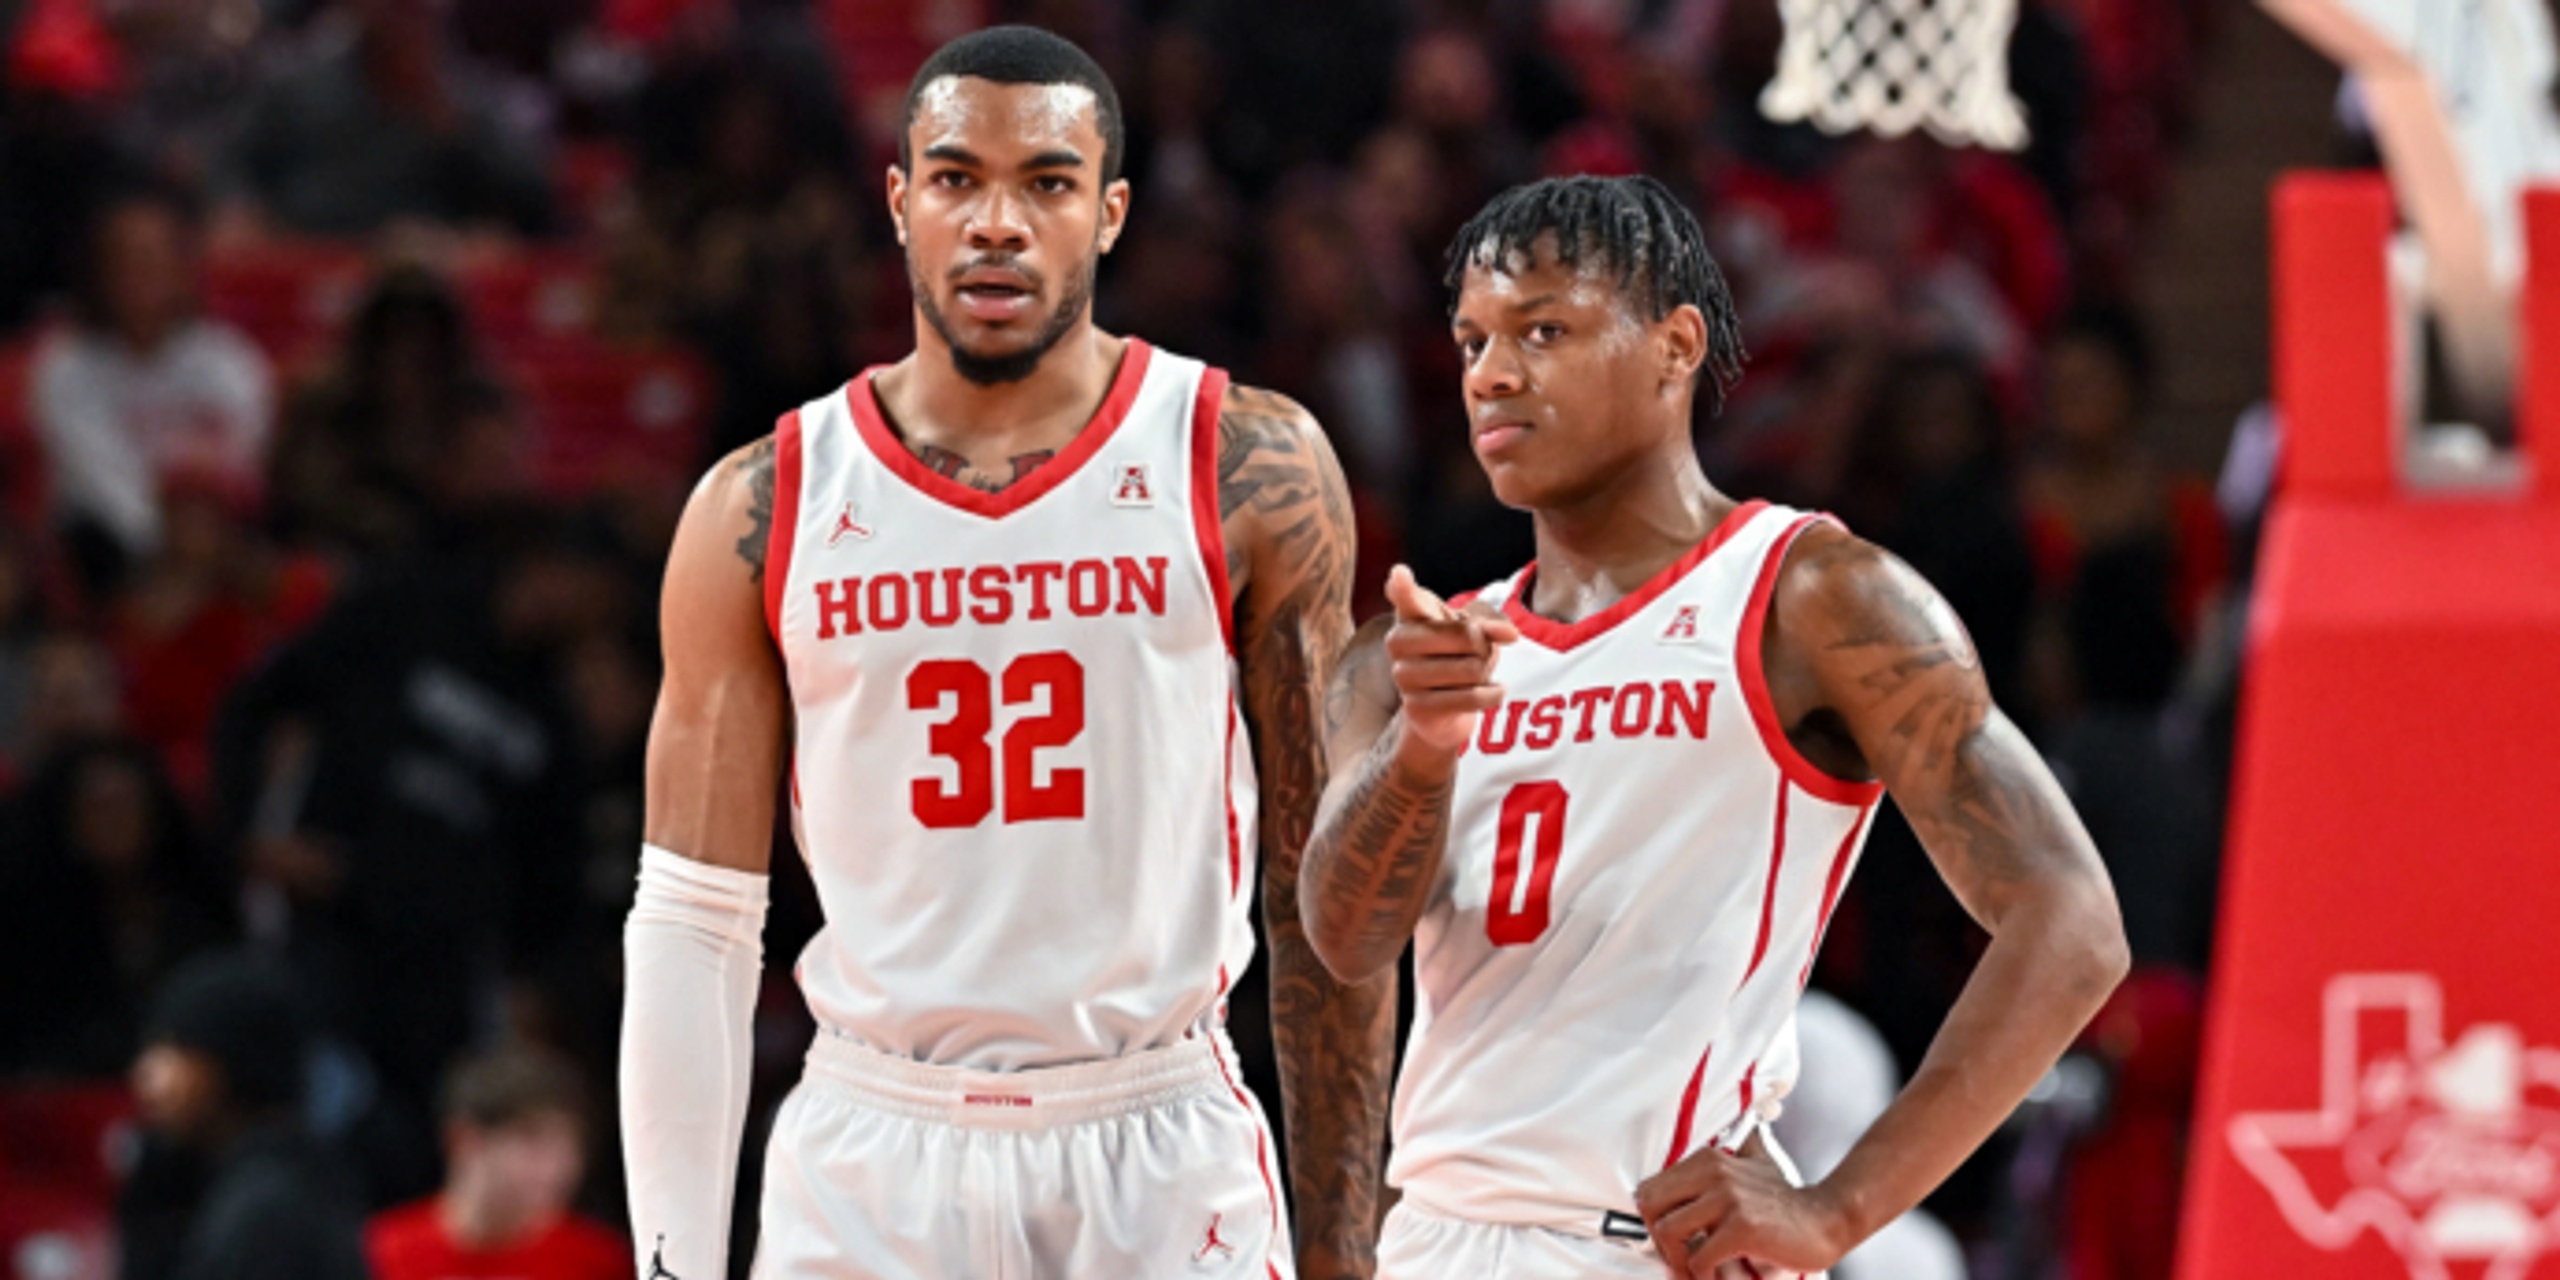 Houston reaches No. 1 in AP poll for first time since 1983